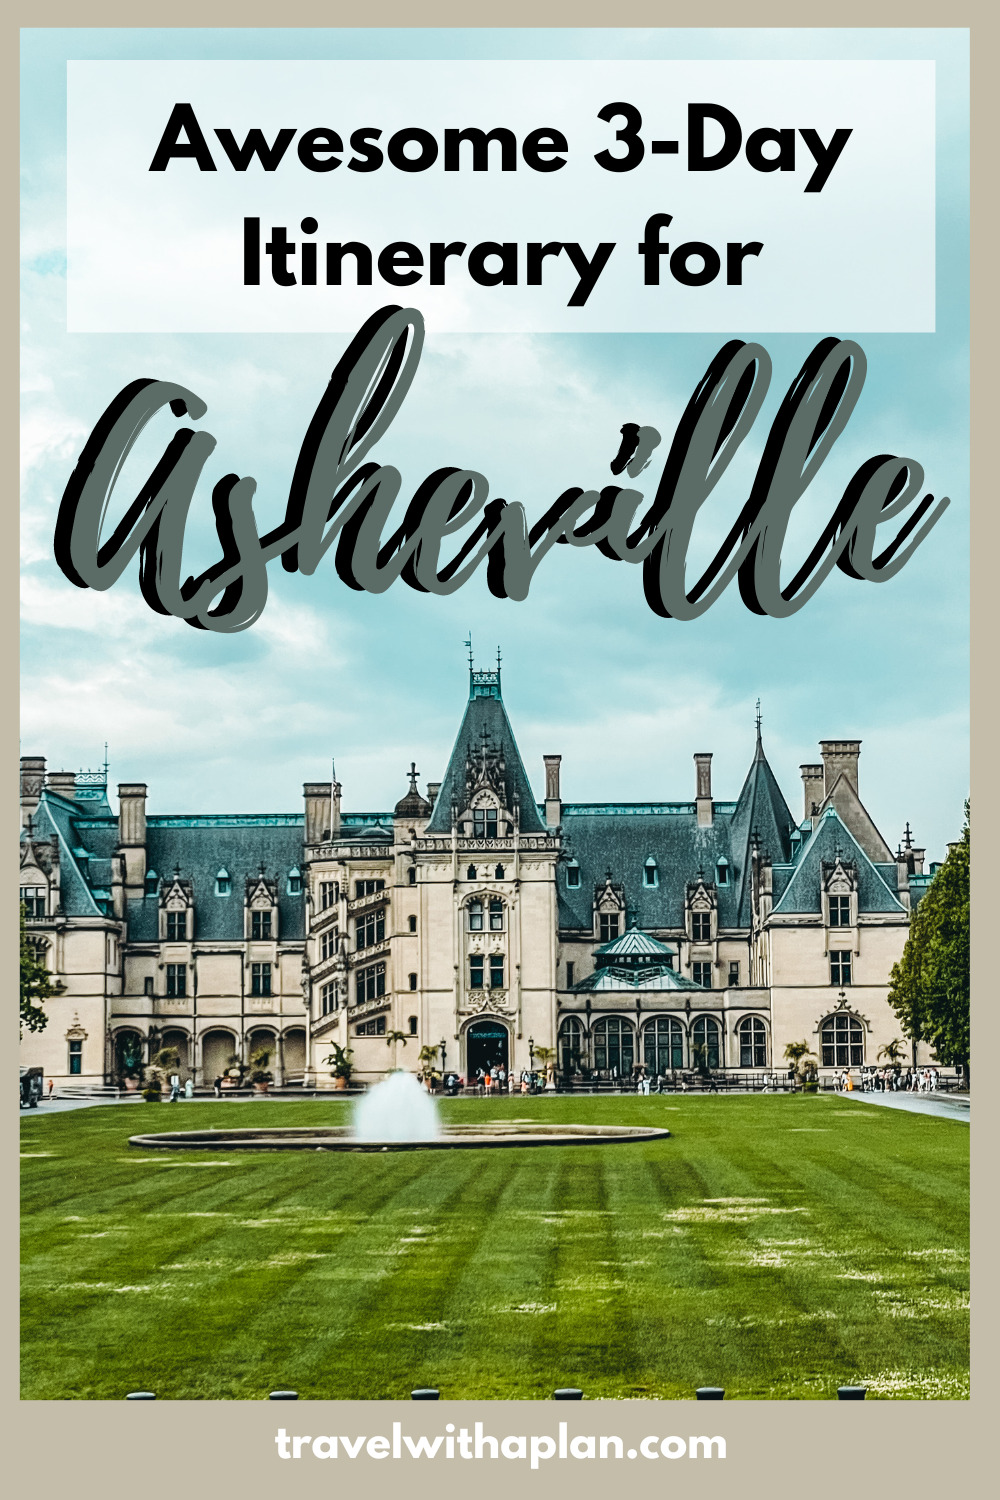 Discover the most fun things to do in Asheville, N.C. with our 3-day Asheville itinerary!